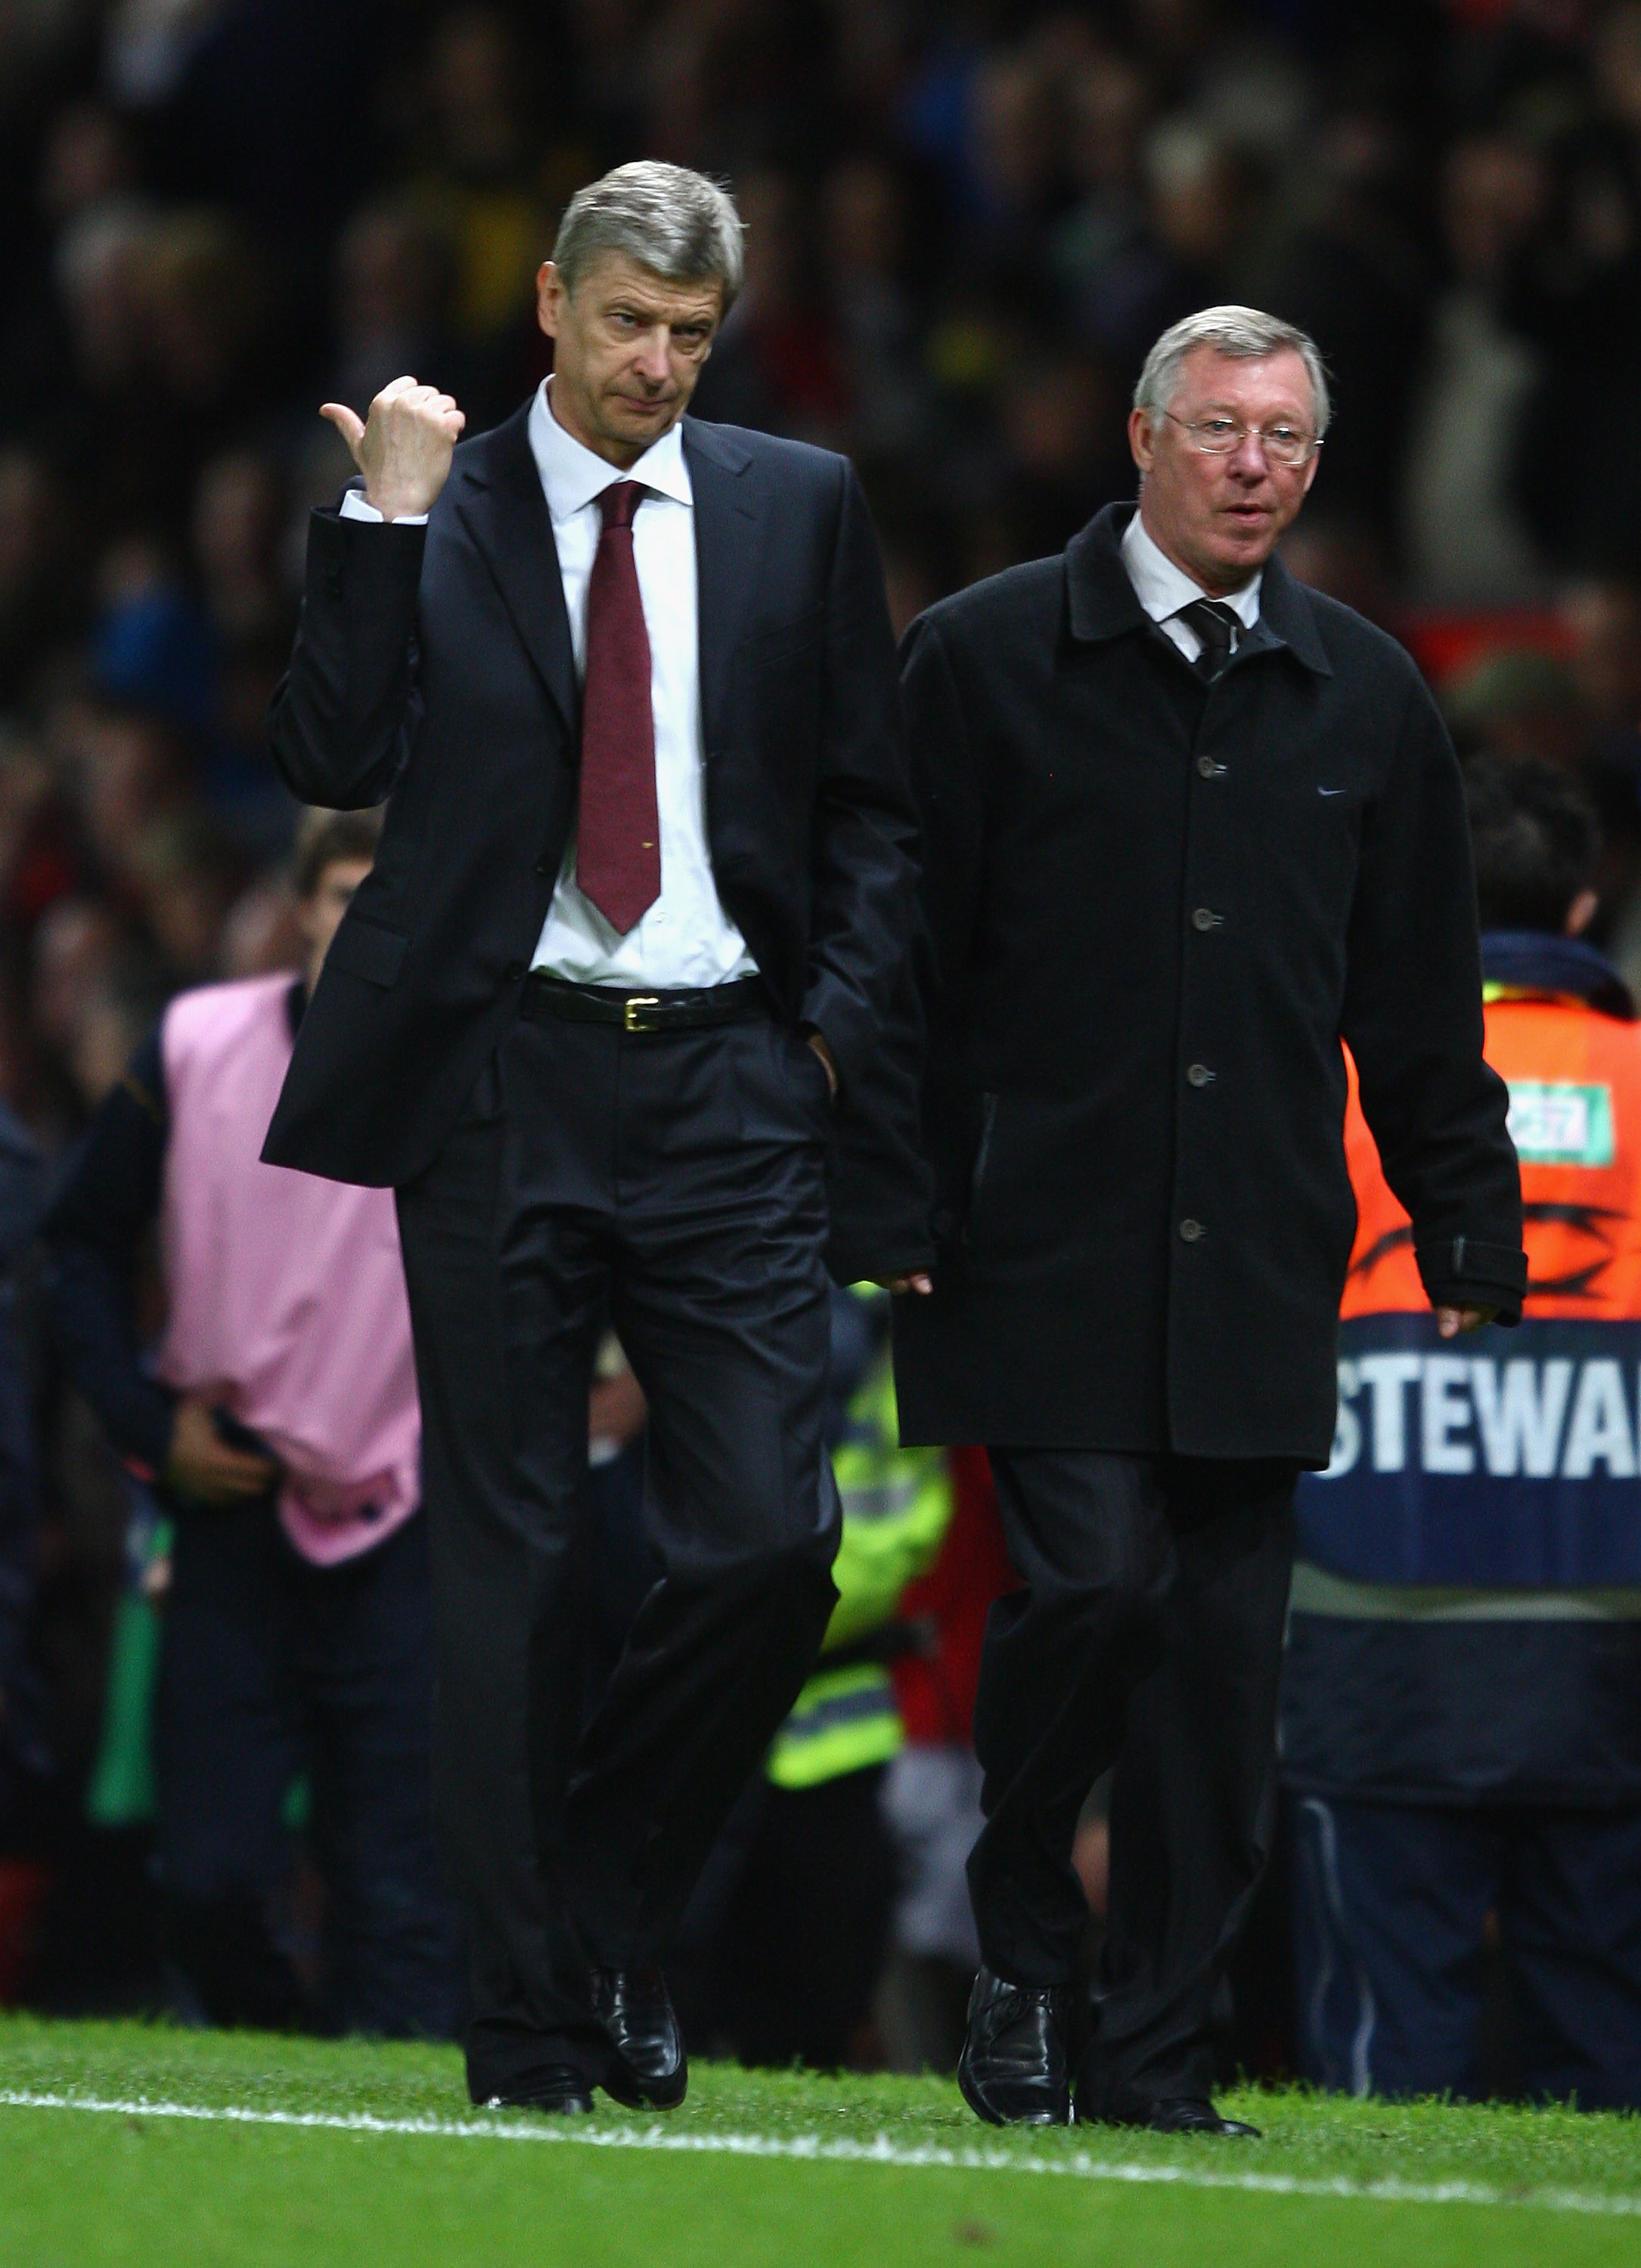 MANCHESTER, UNITED KINGDOM - APRIL 29:   Arsenal Manager Arsene Wenger gestures as he walks off with Manchester United Manager Sir Alex Ferguson at the end of the UEFA Champions League Semi Final First Leg match between Manchester United and Arsenal at Ol